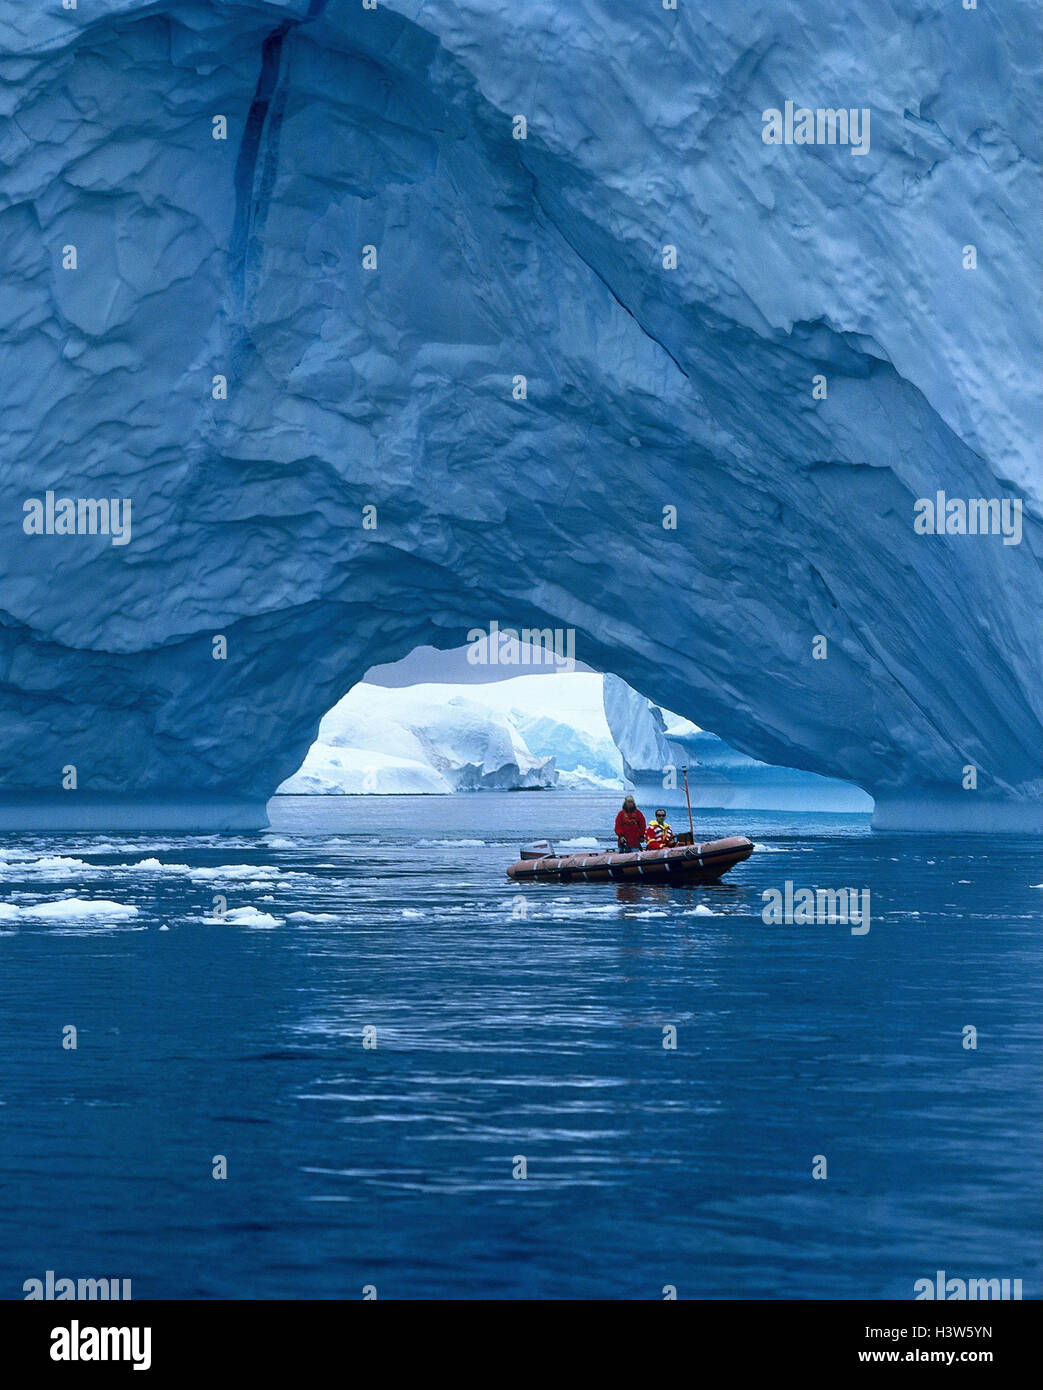 Greenland, Jakobshavn, ice cream fjord, rubber dinghy, iceberg sea, ice, icebergs, ice cream formations, fjord, boat, cold, nature Stock Photo